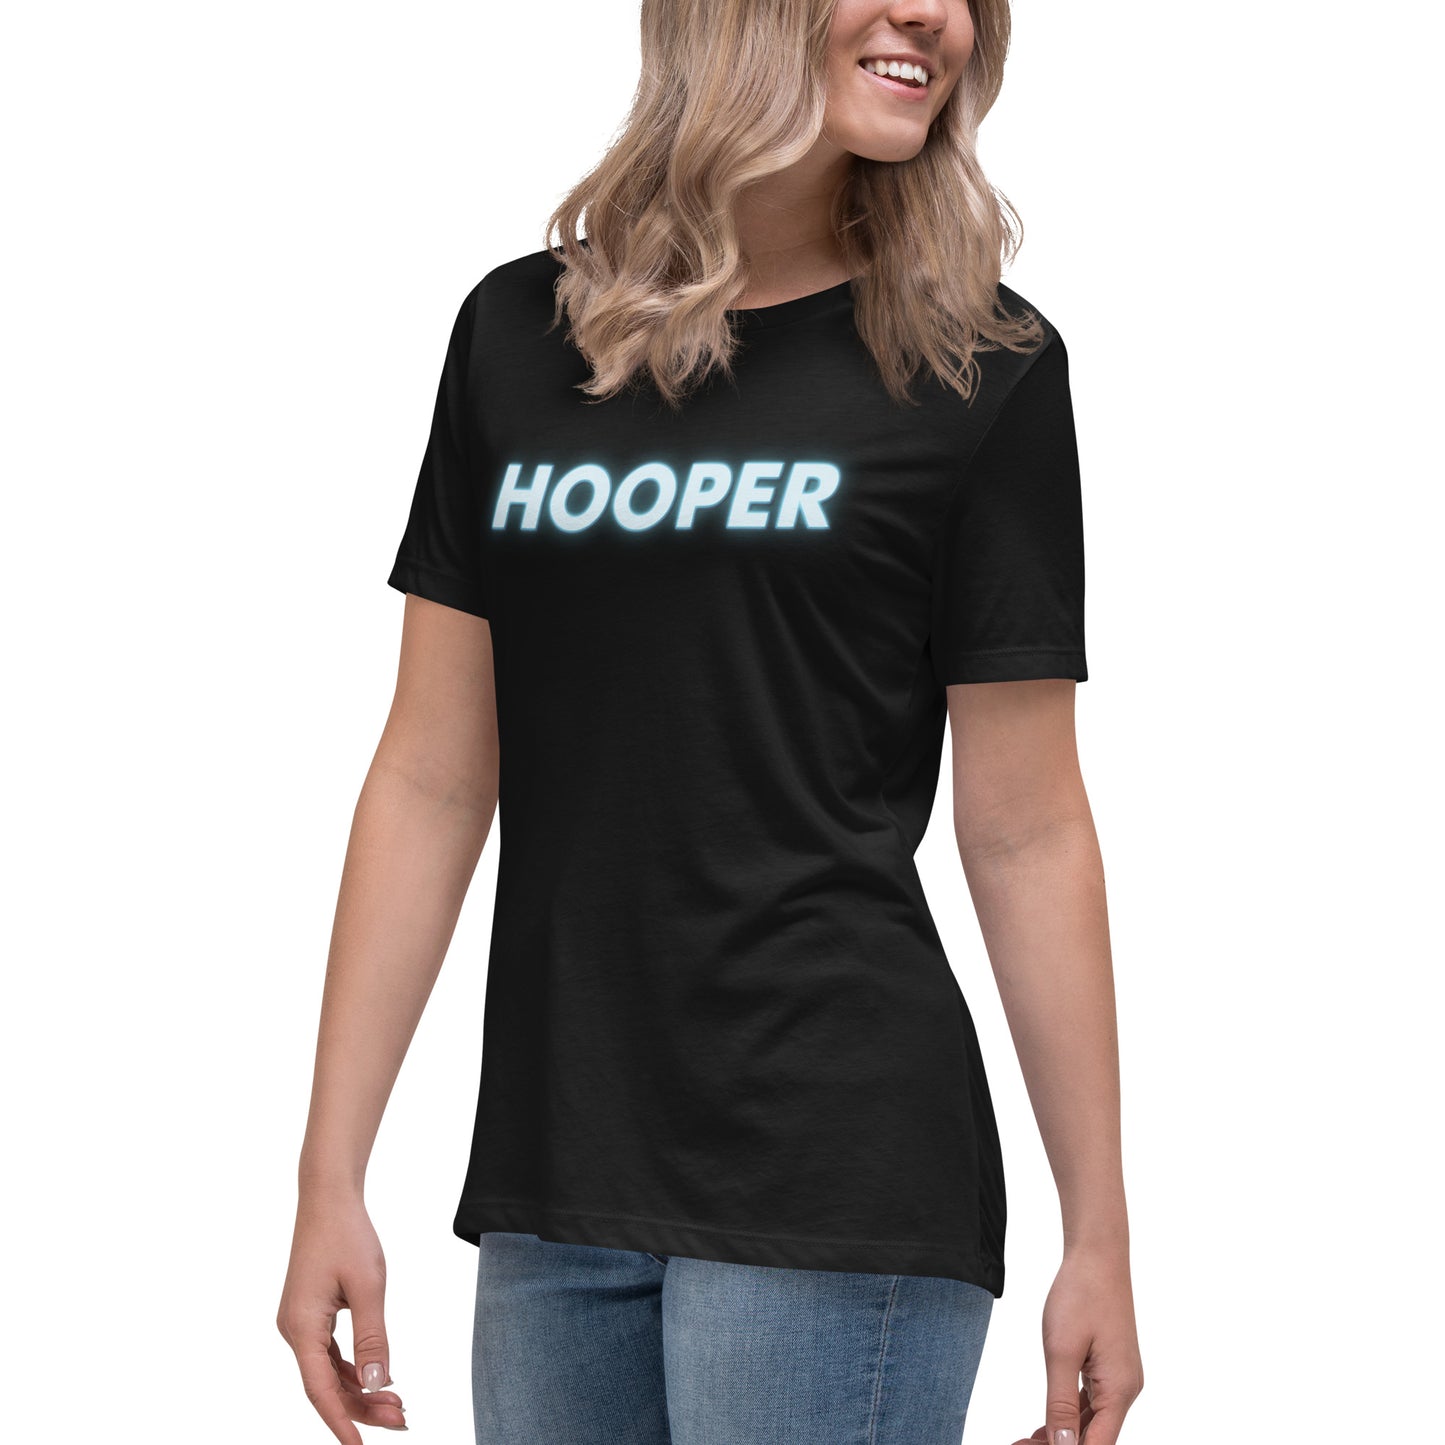 Blue Hooper Women's Relaxed T-Shirt - Comfortable and Stylish Casual Wear